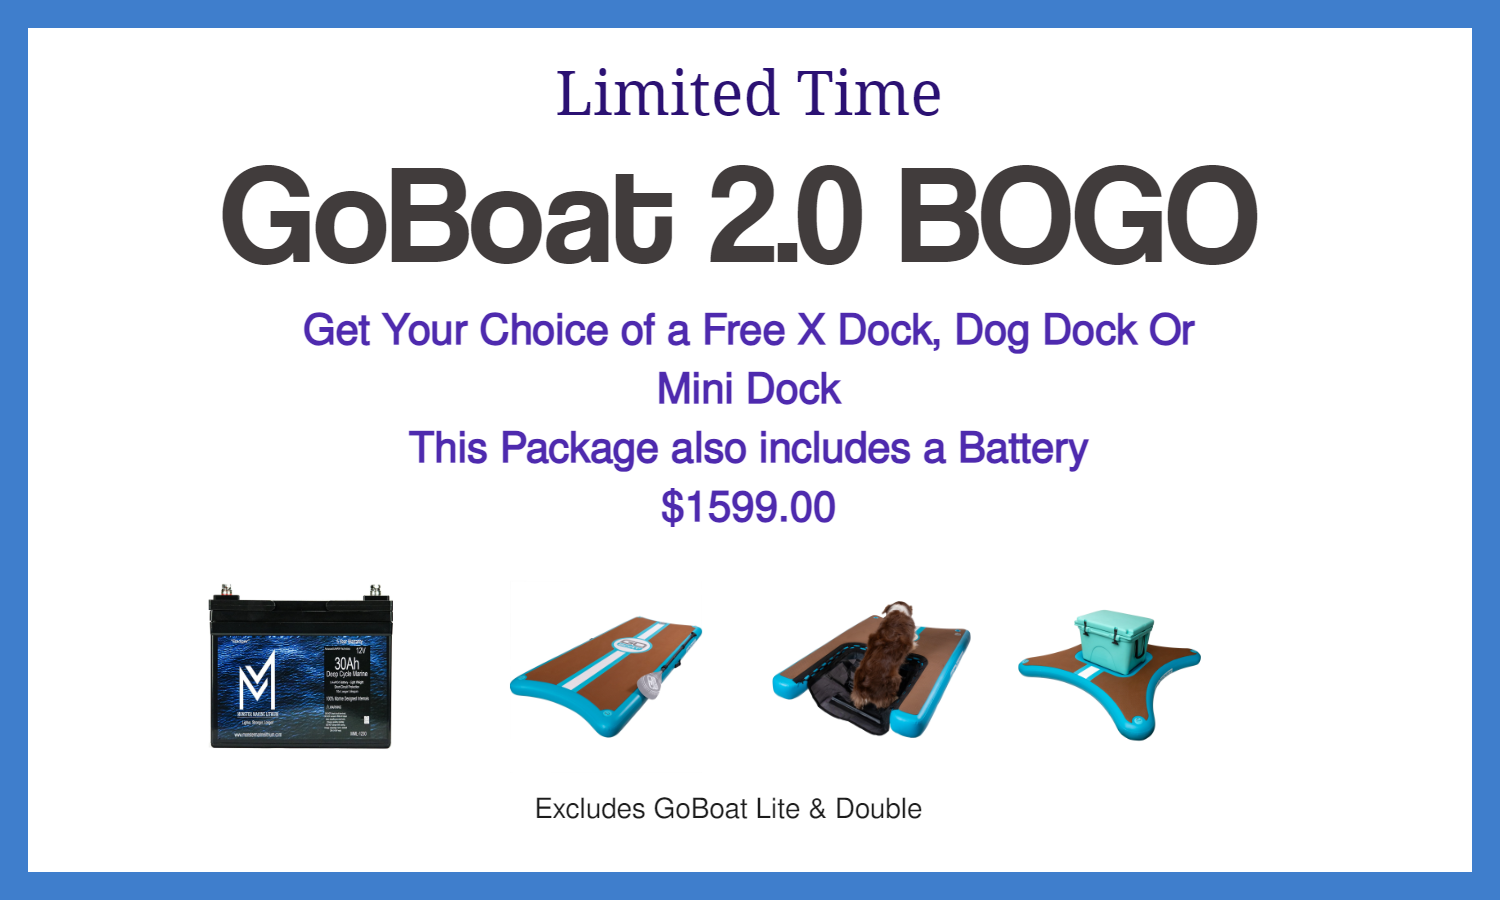 A limited time goboat 2.0 bogo package also includes a battery